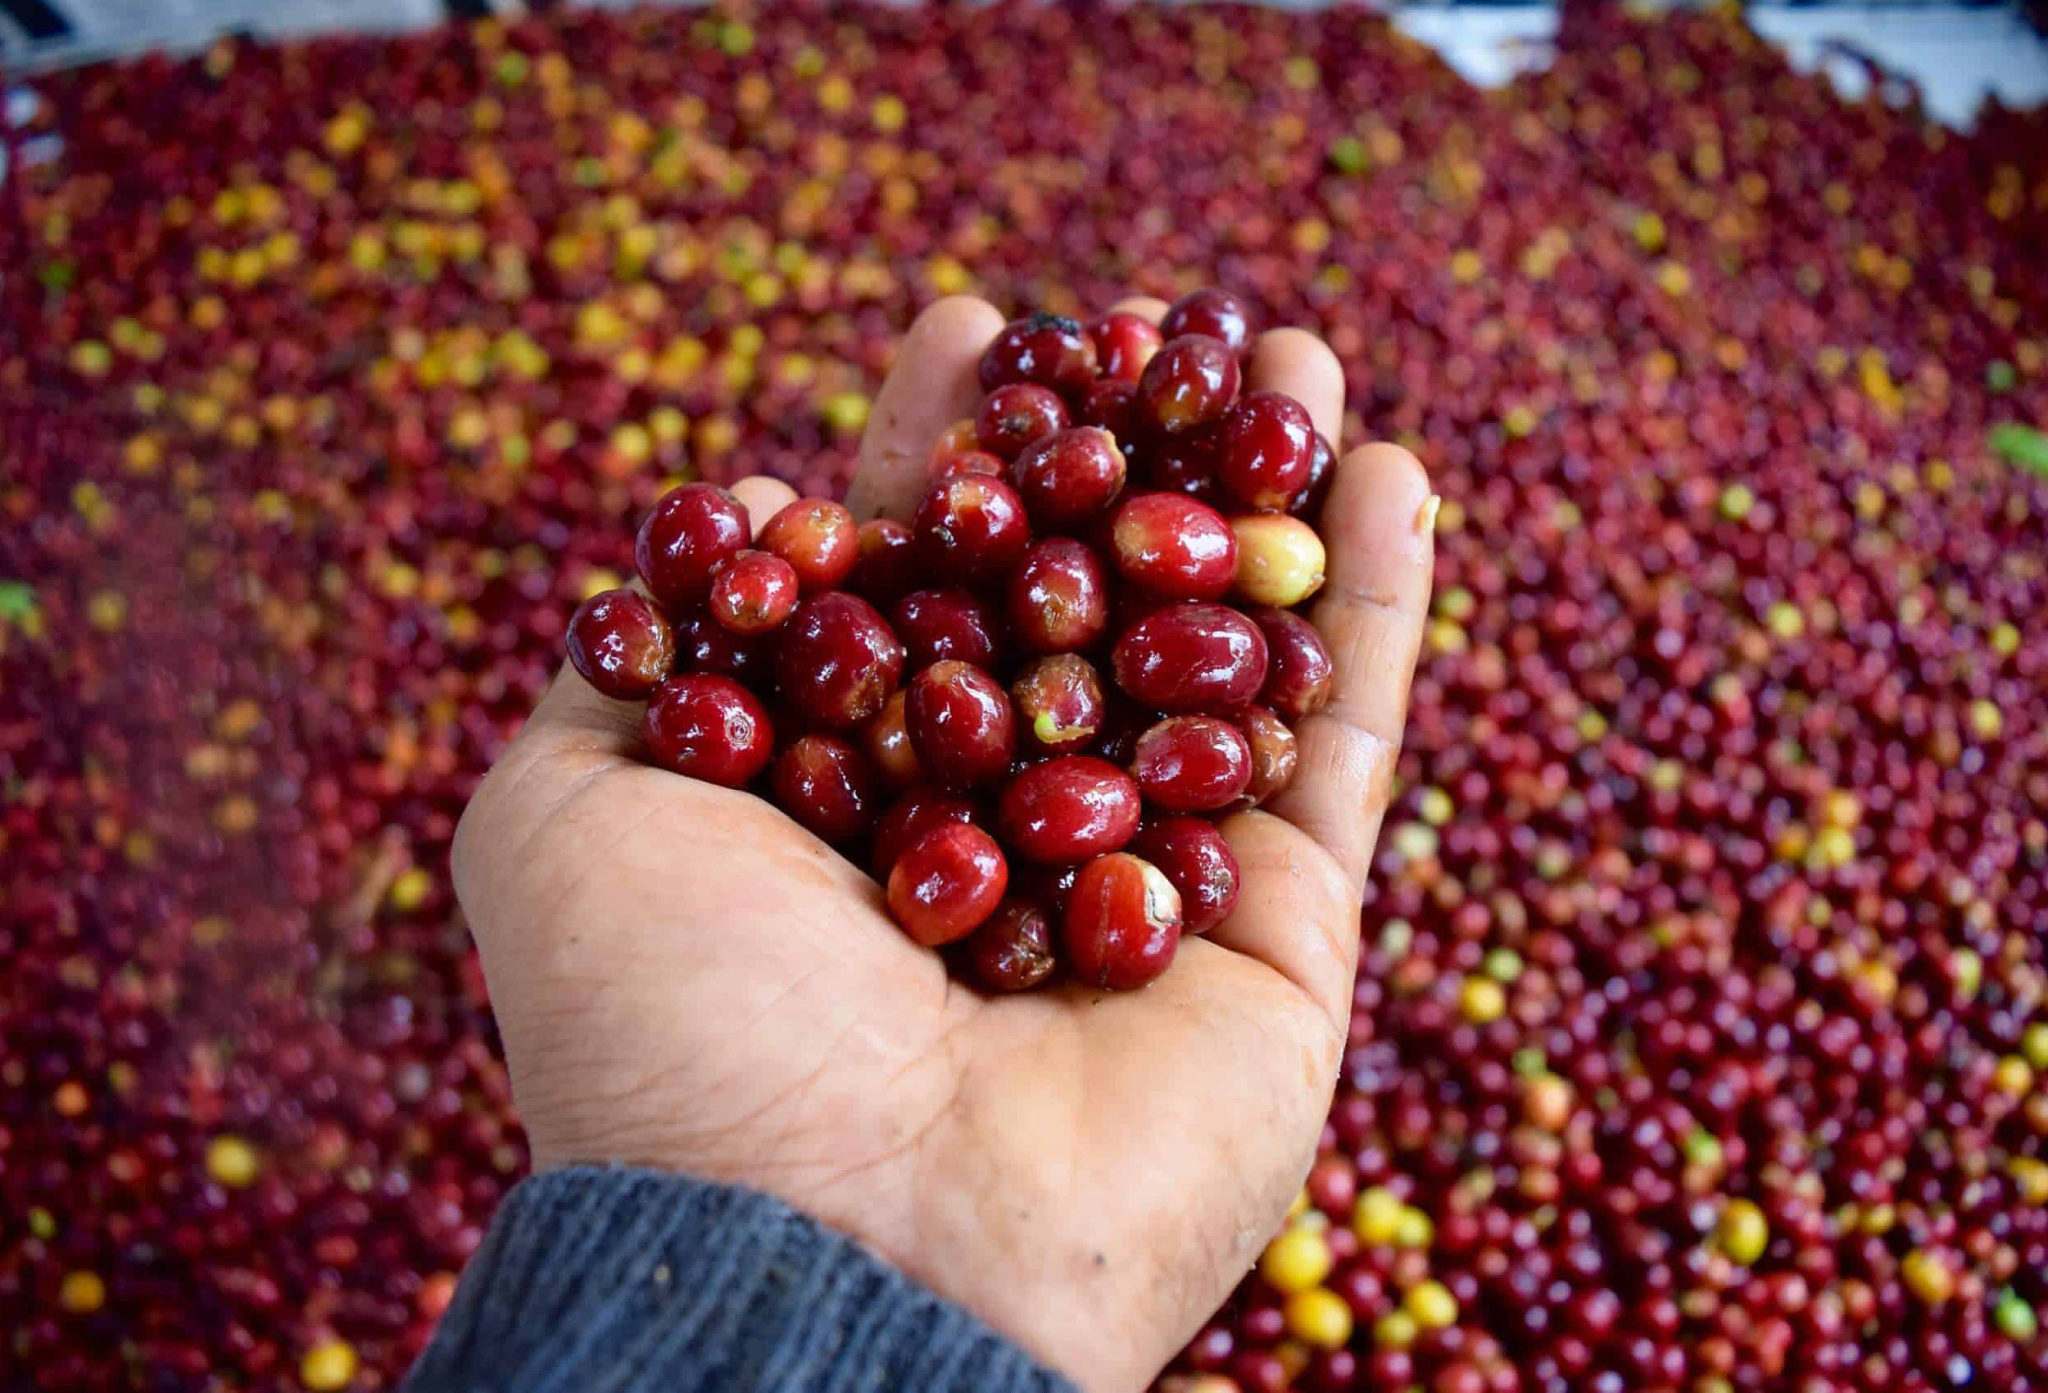 This is how your coffee is processed in Colombia